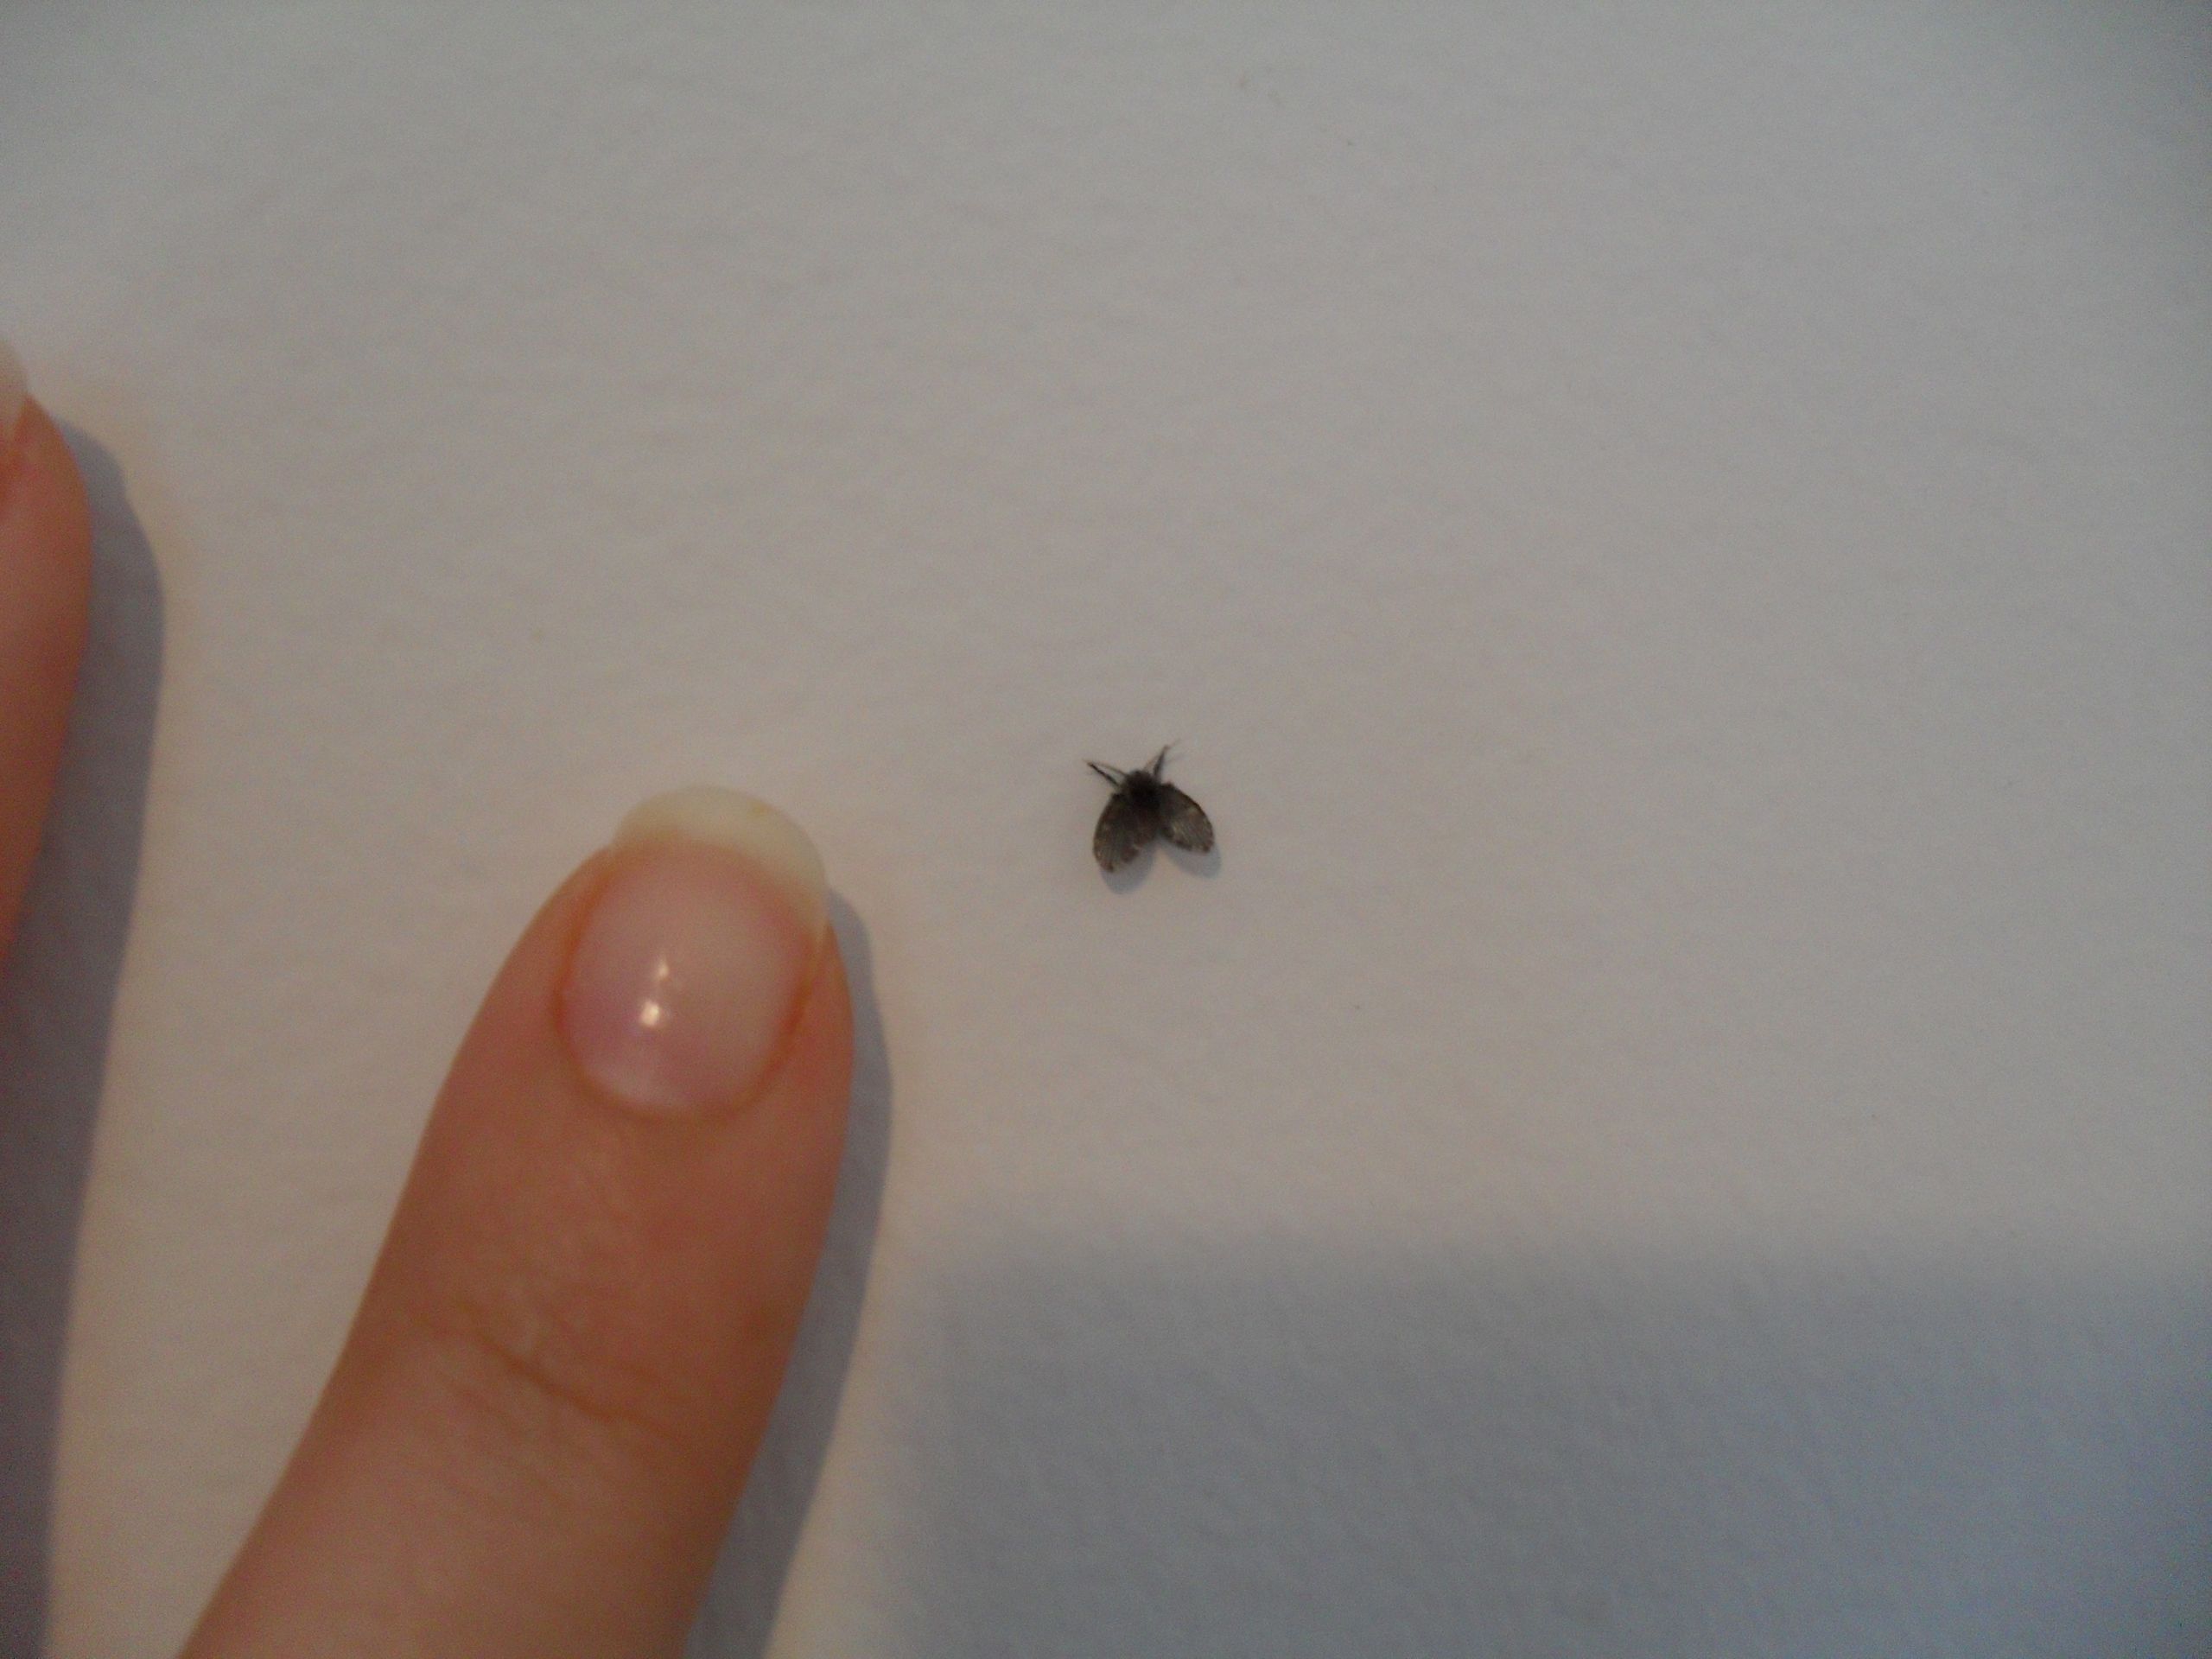 Small Black Flies In Bathroom
 301 Moved Permanently